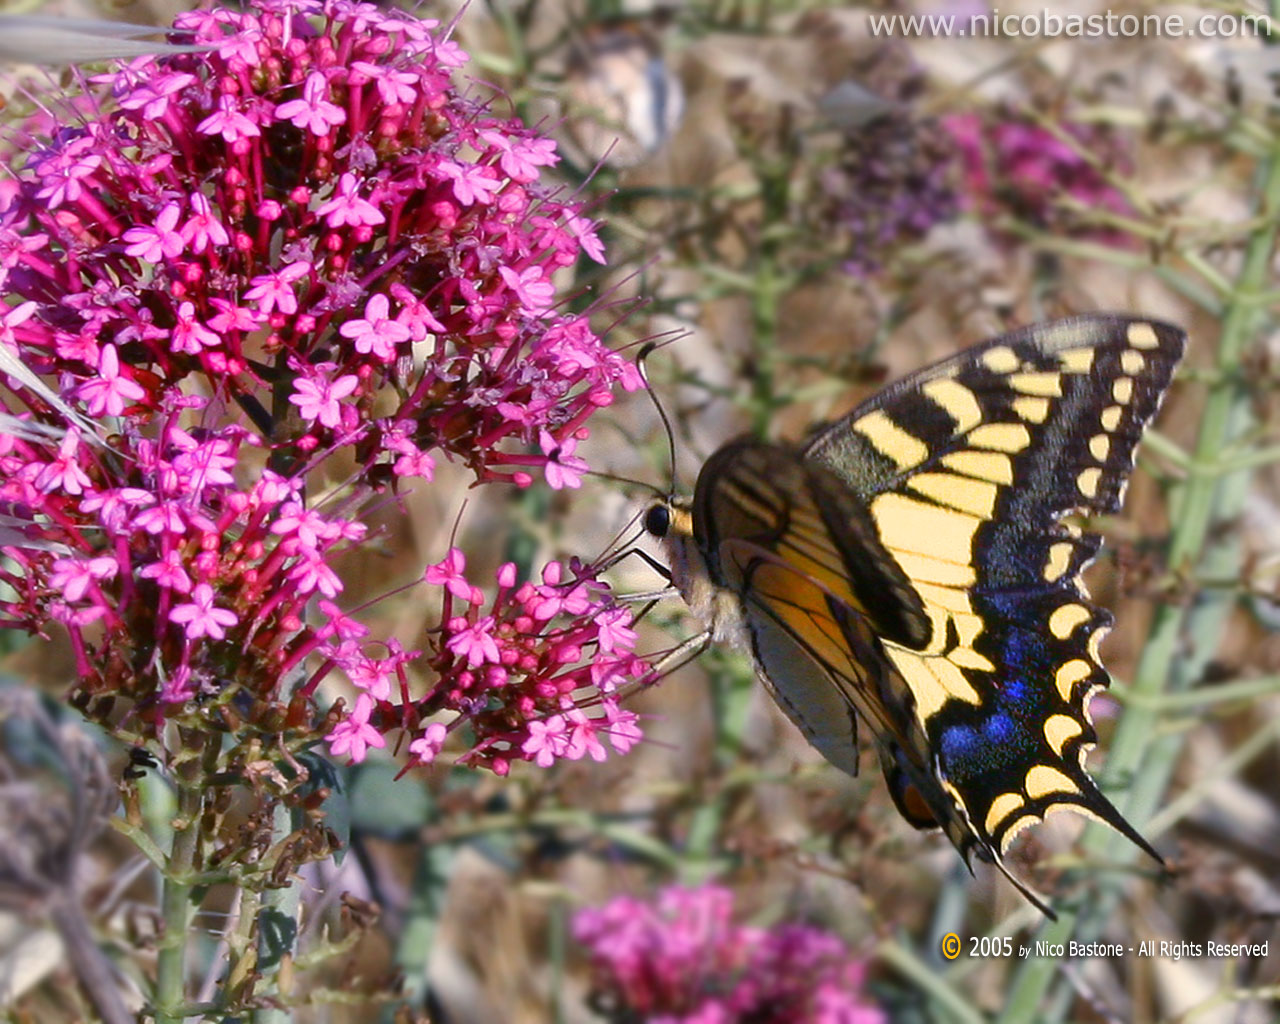 Macaone (Papilio Machaon) Swallowtail - Wallpapers Sfondi per Desktop - Copyright by Nico Bastone - All Rights Reserved